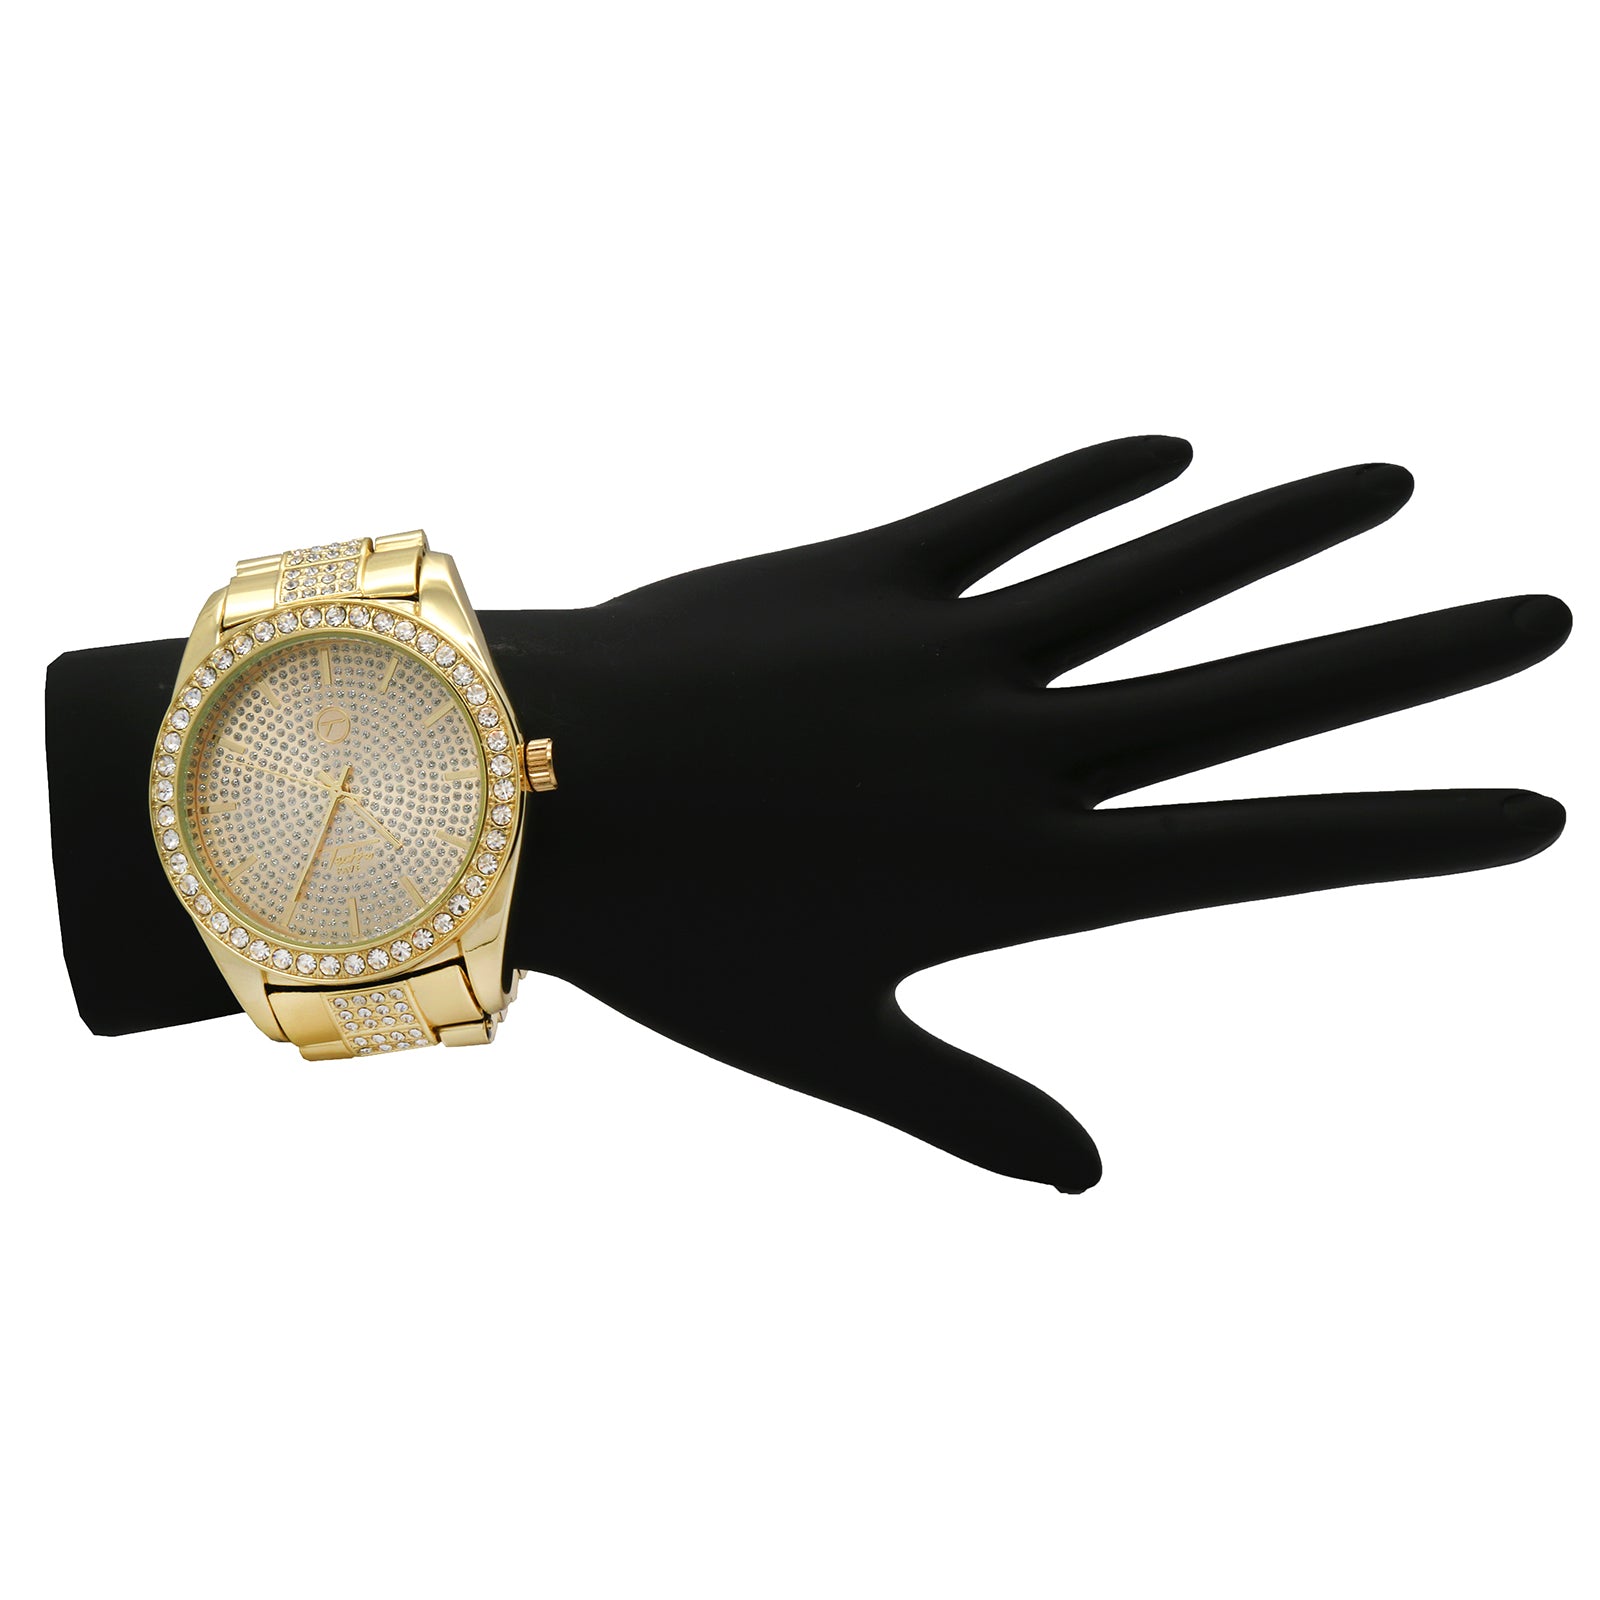 Gold Fully Ice Out Stardust Techno Pave Watch